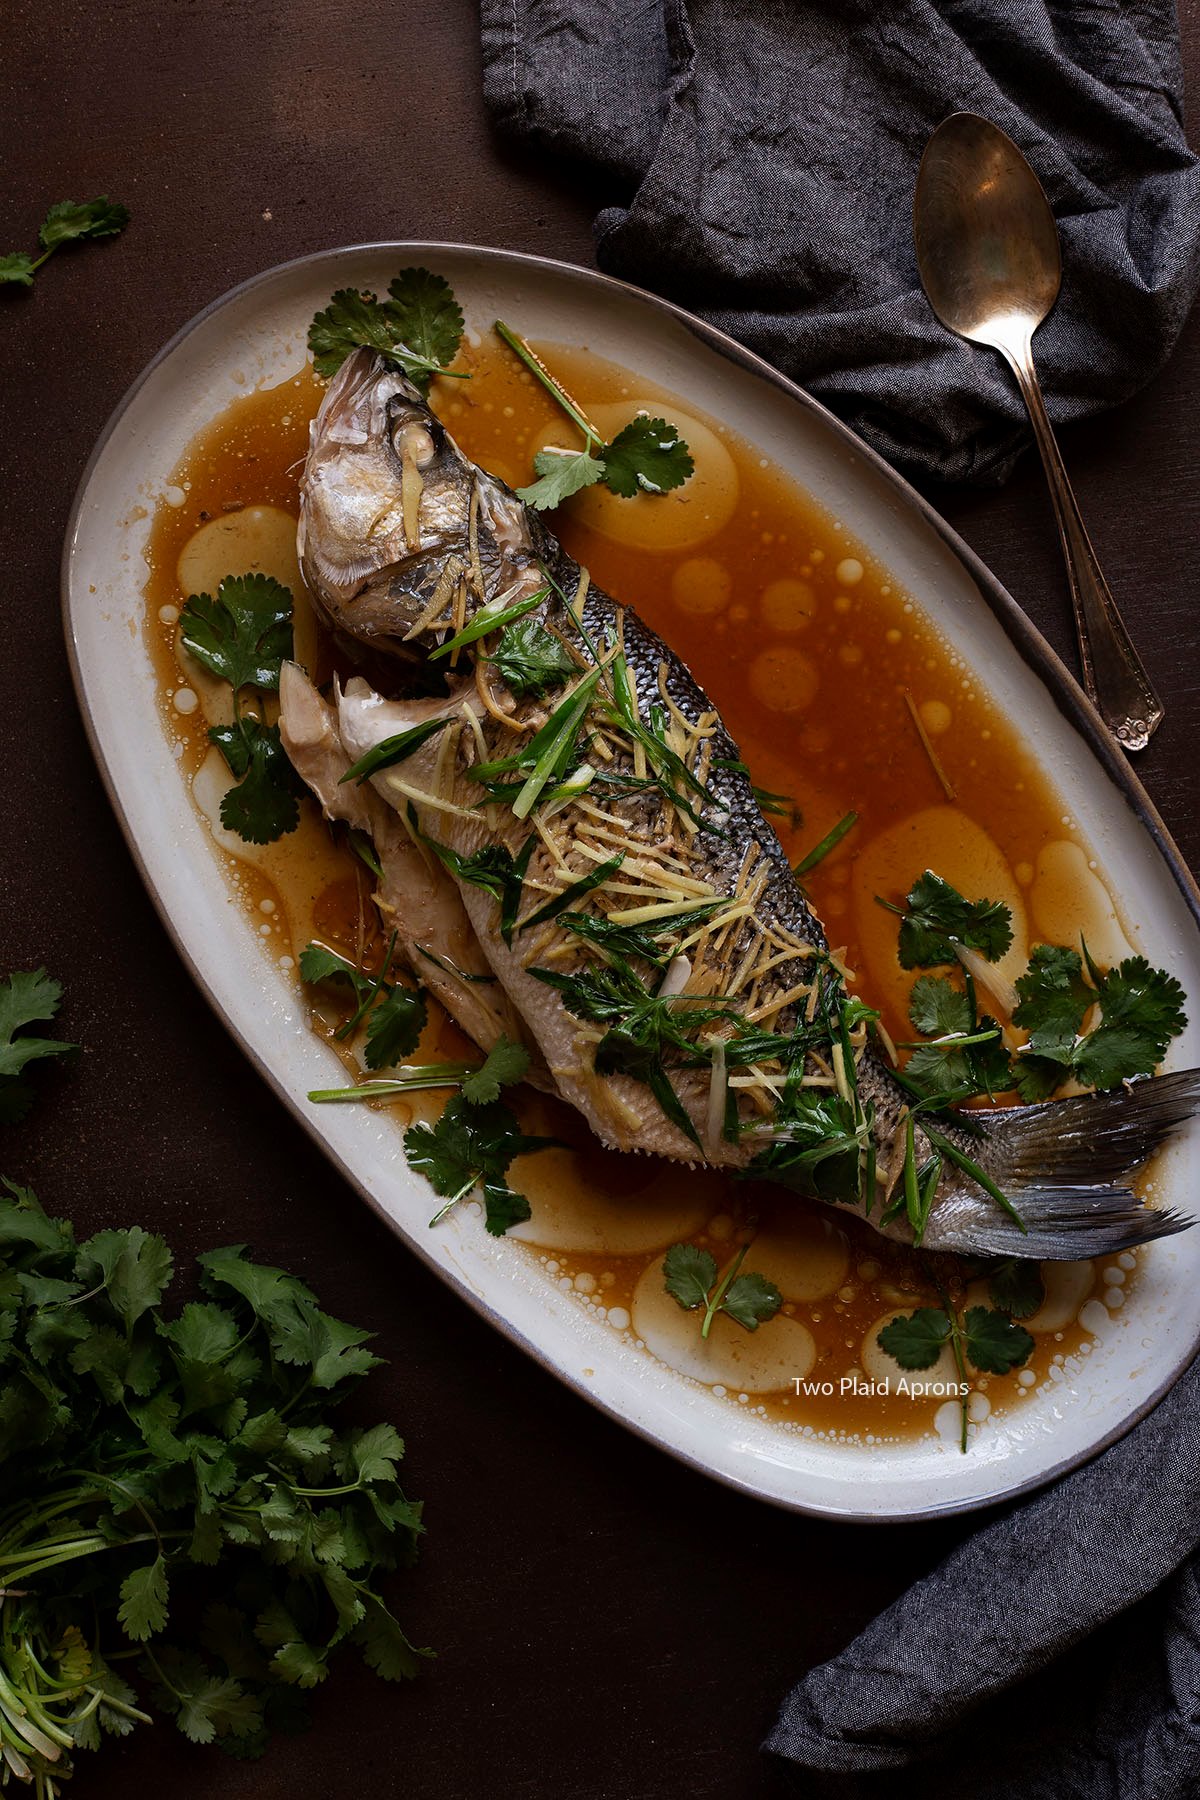 Top down view of the Chinese steamed whole fish with ginger and scallion on a platter.